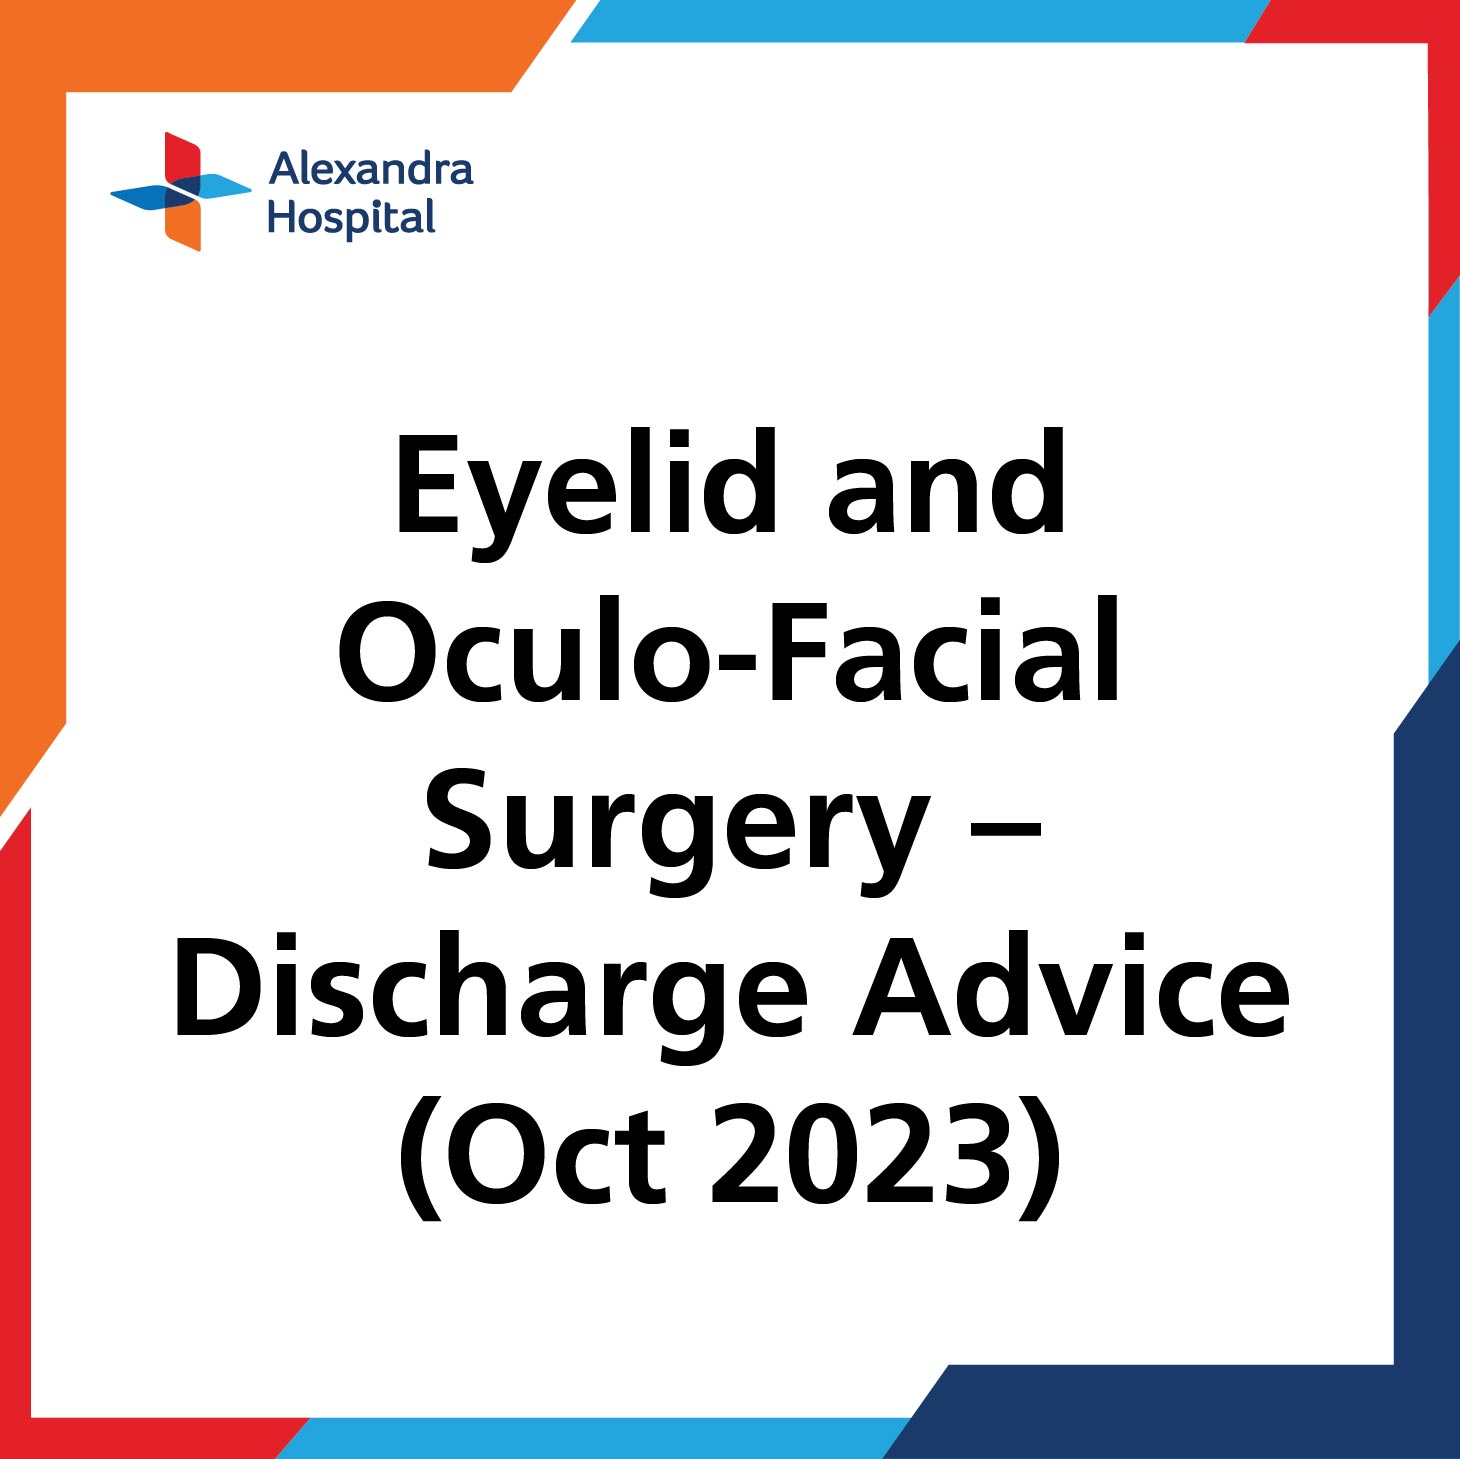 Eyelid and Oculo-Facial Surgery Discharge Advice